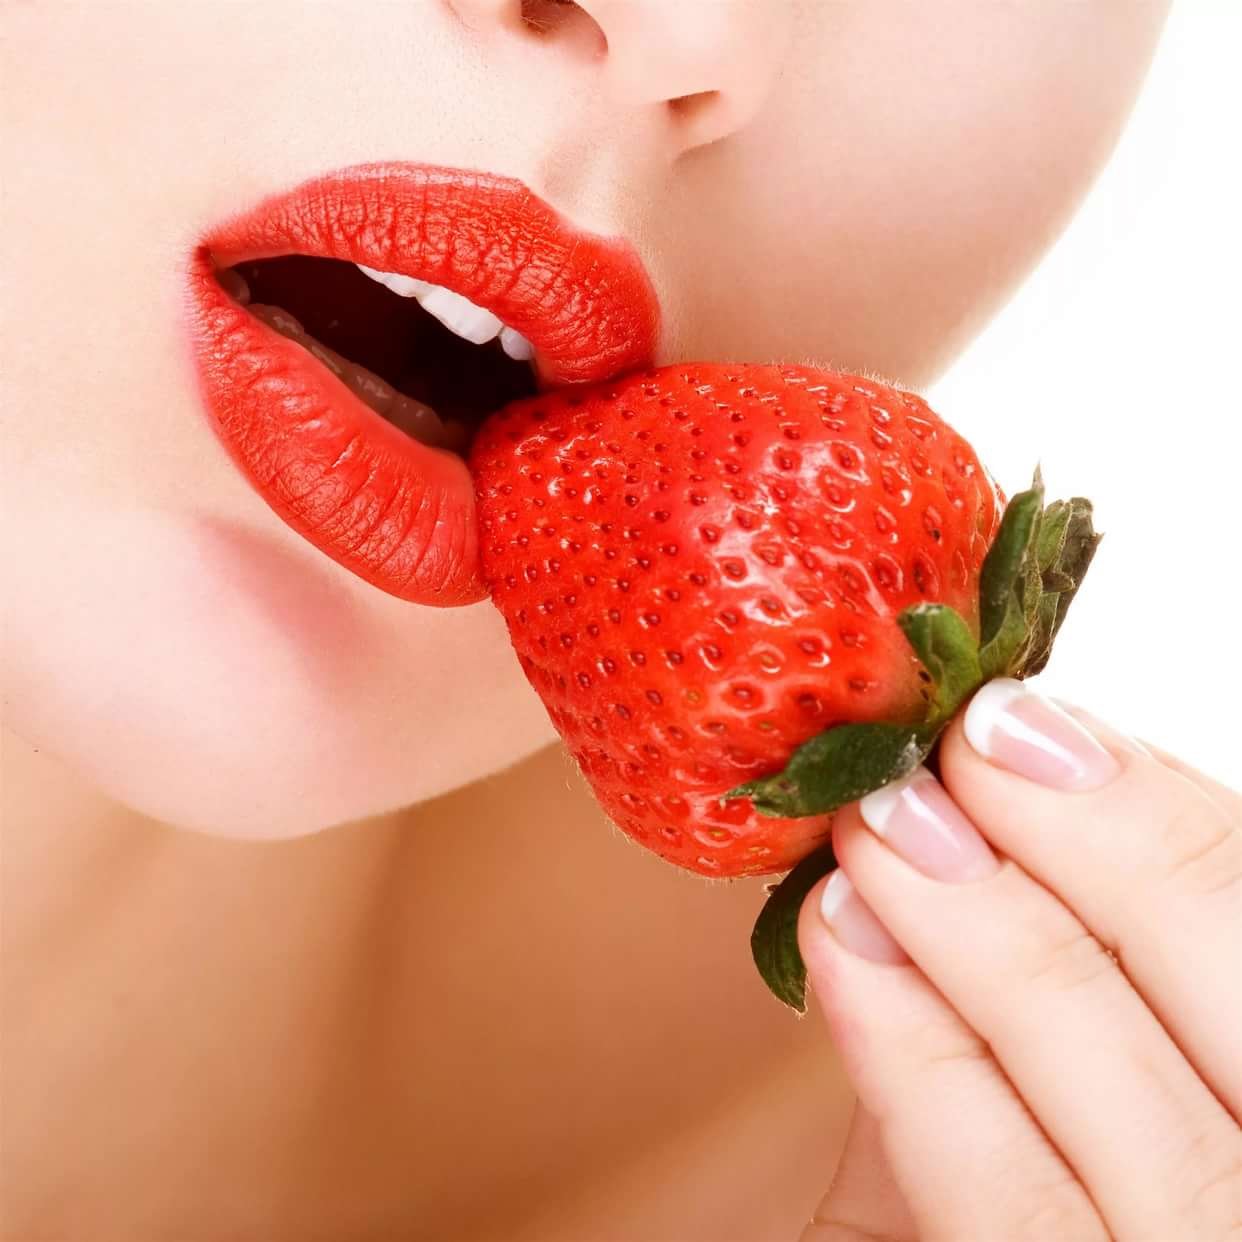 Sexy Woman Eating Strawberry Stock Photo